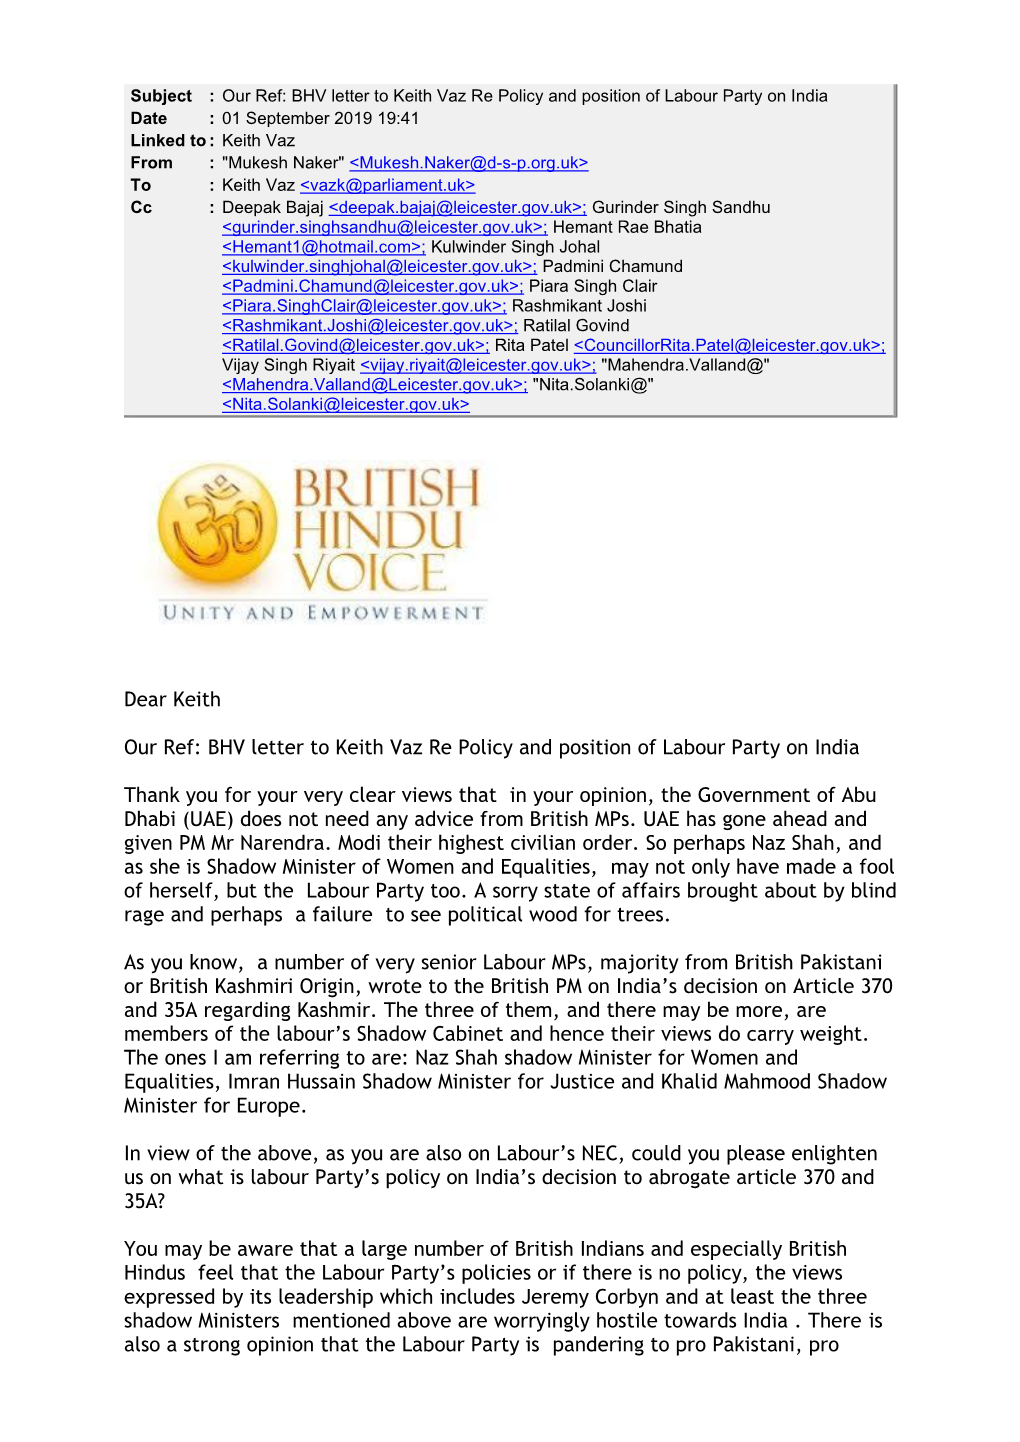 BHV Letter to Keith Vaz Re Policy and Position of Labour Party on India